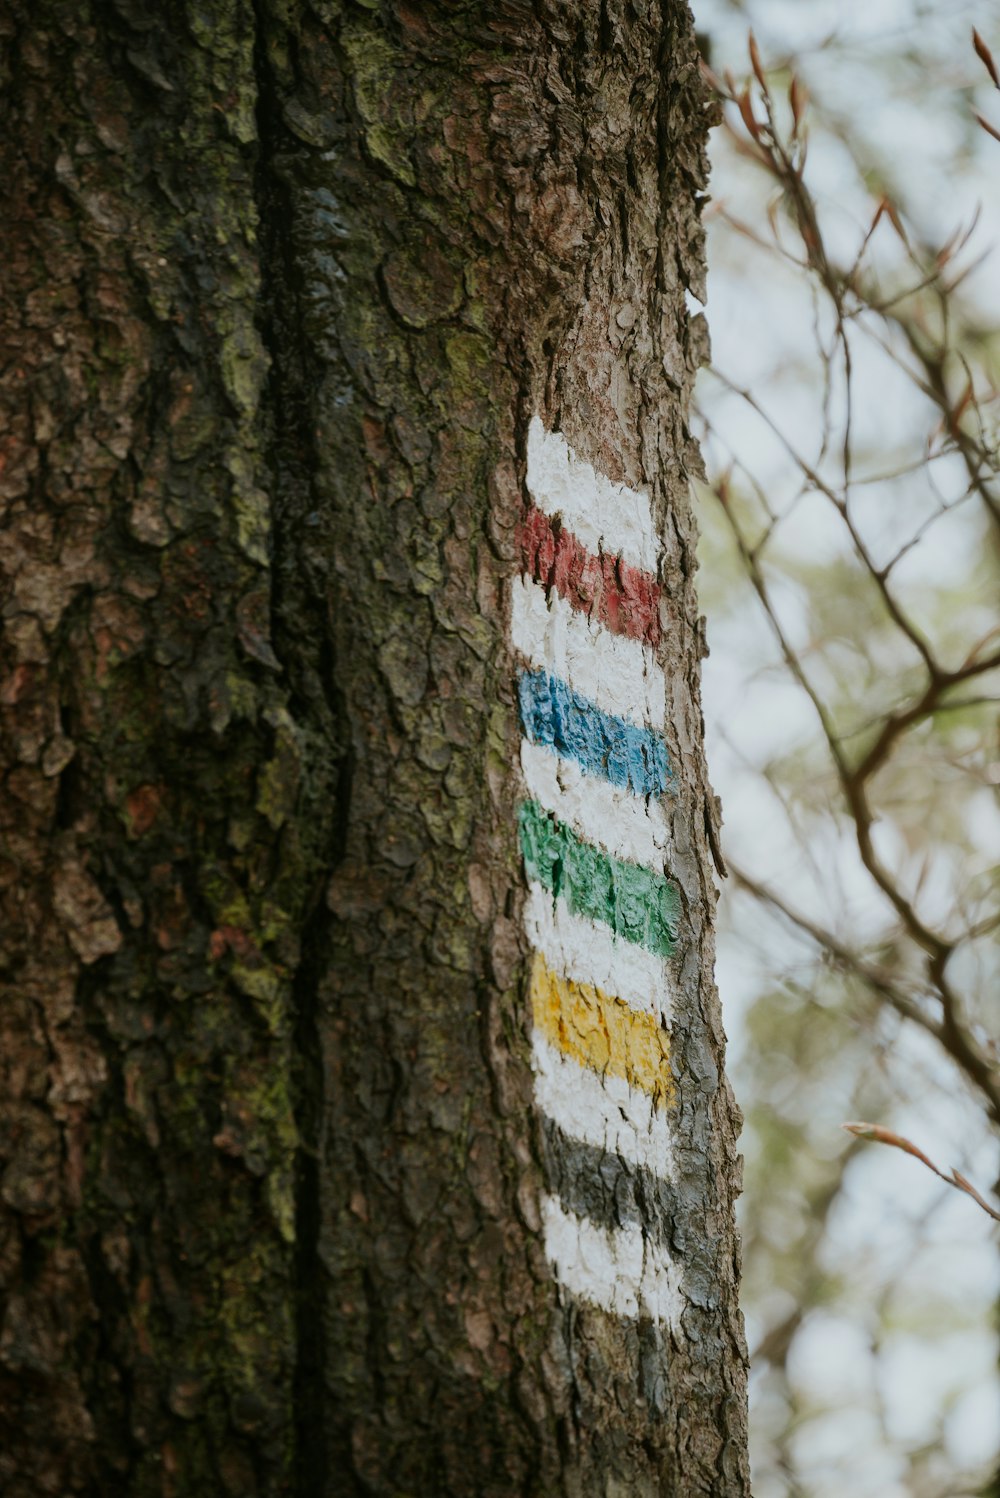 a sign painted on the bark of a tree